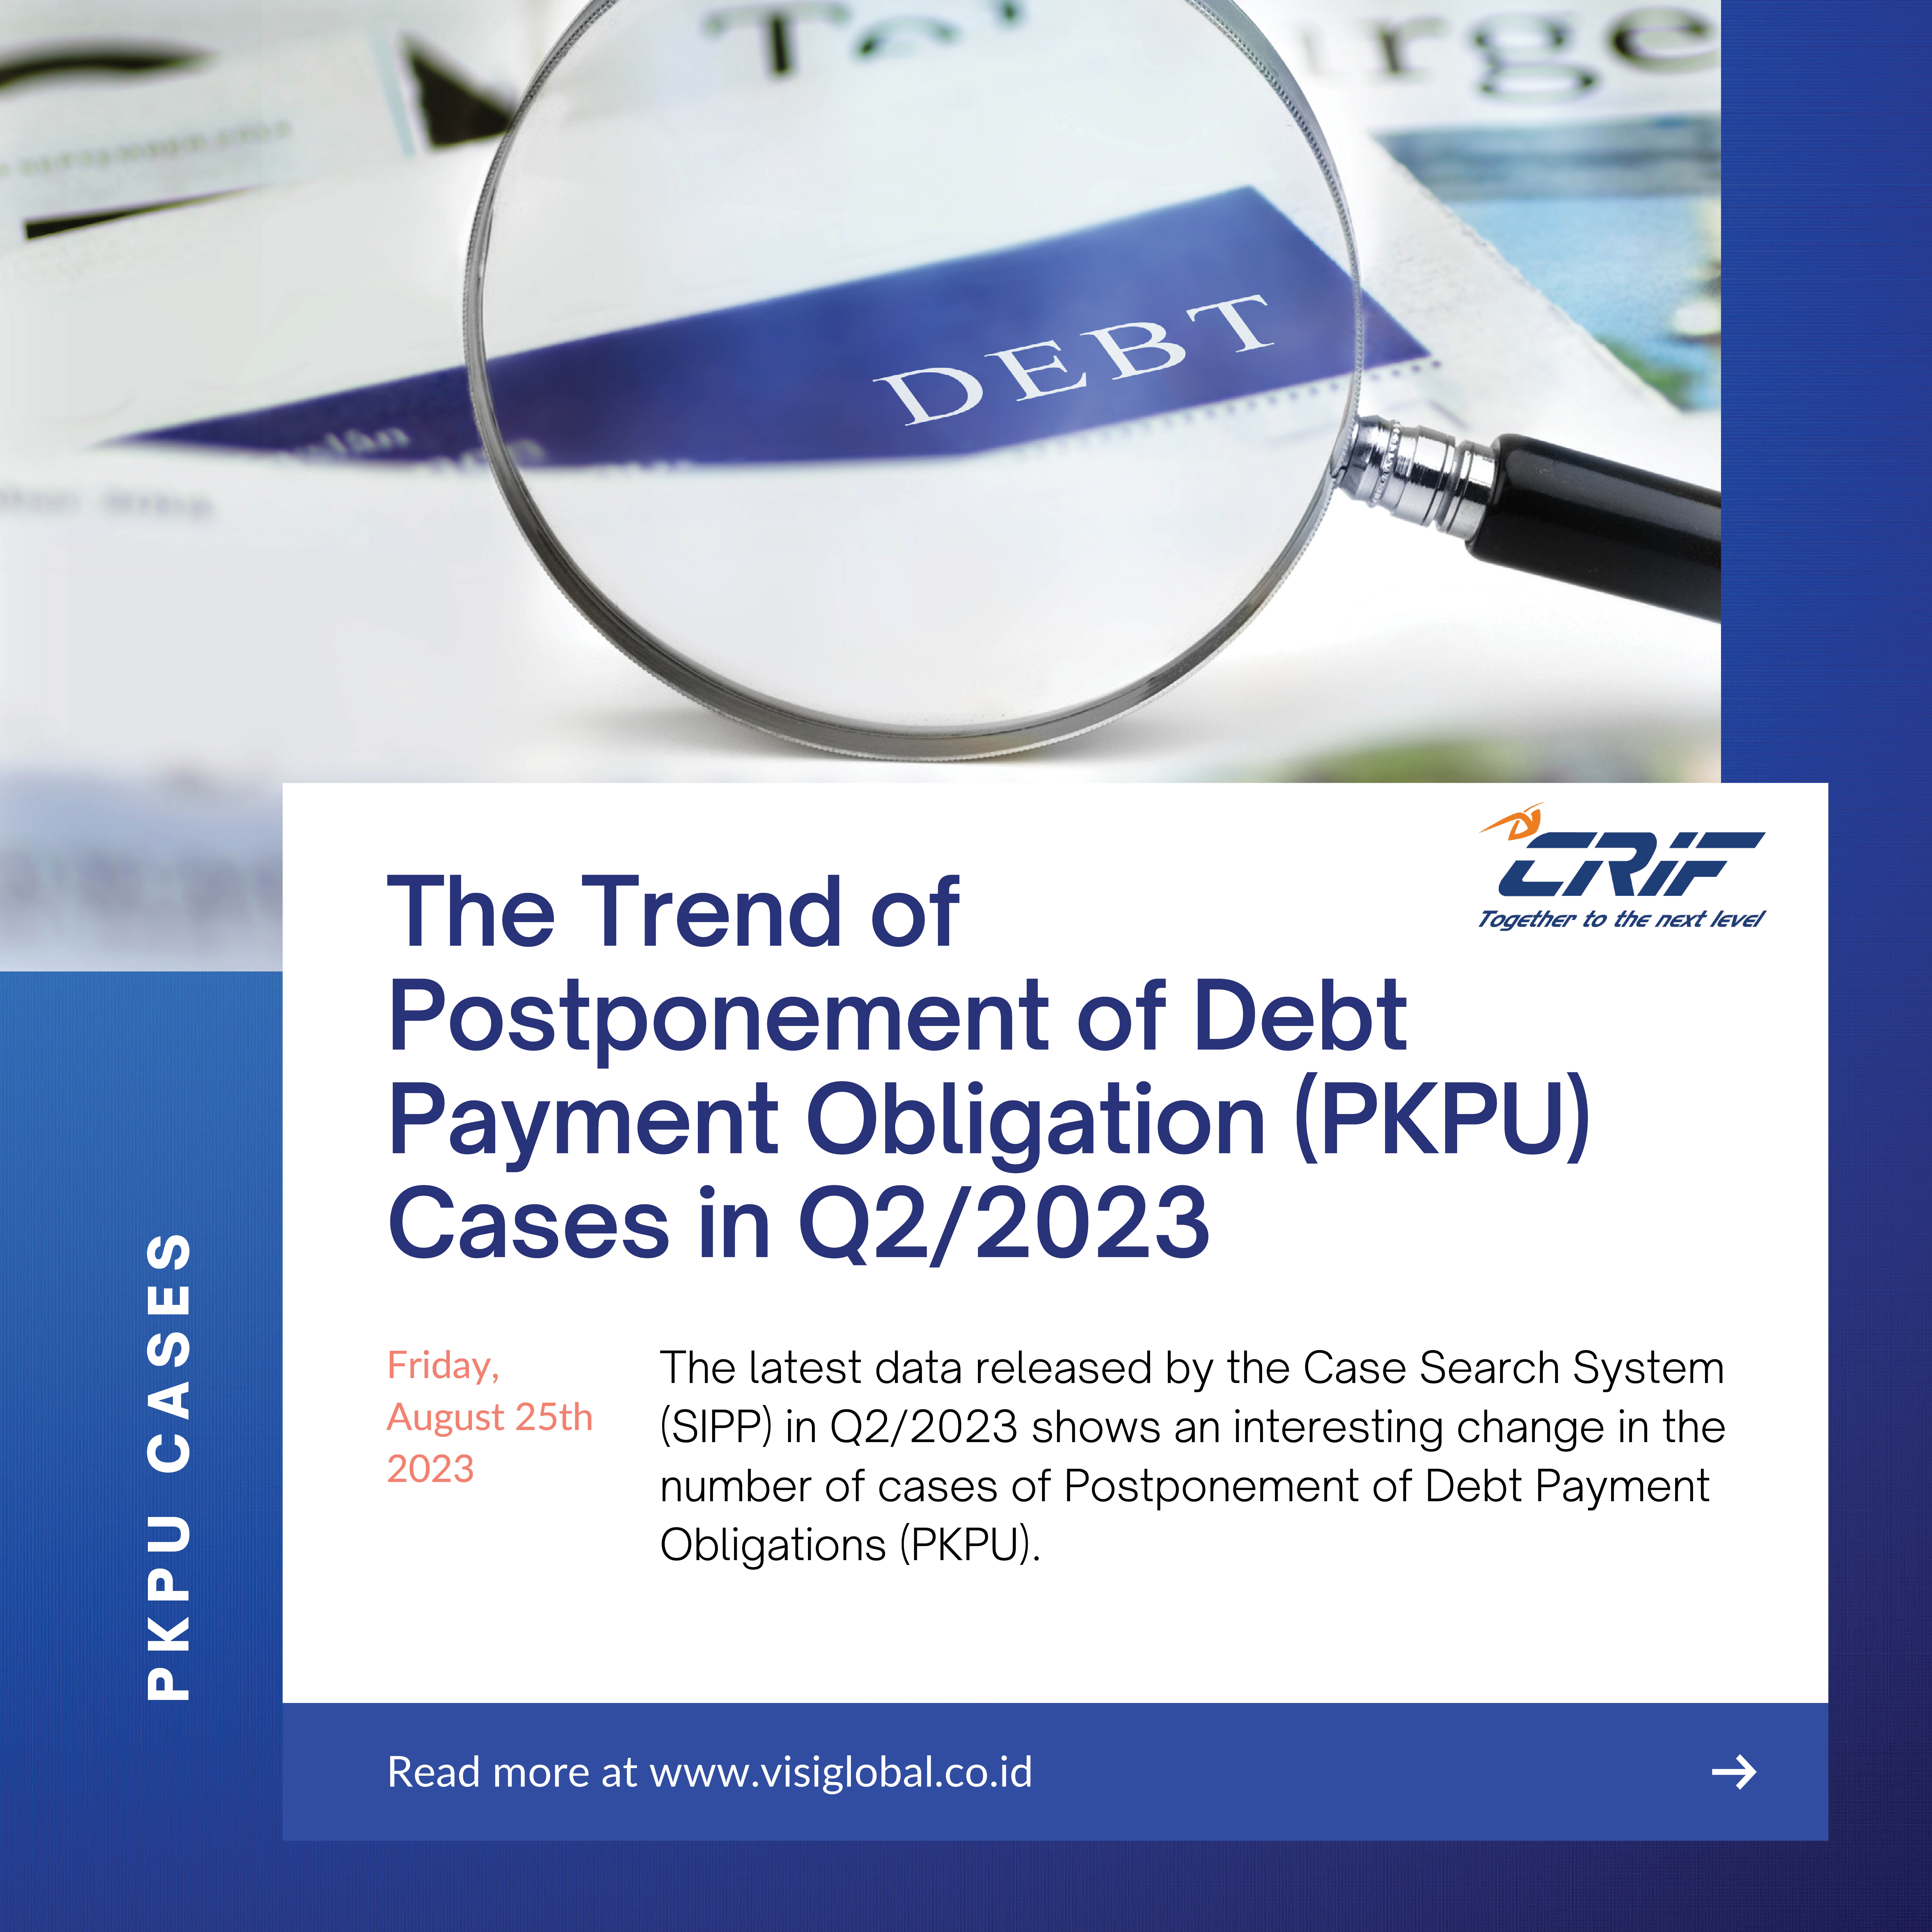 The Trend of Postponement of Debt Payment Obligations (PKPU) Cases in Q2/2023